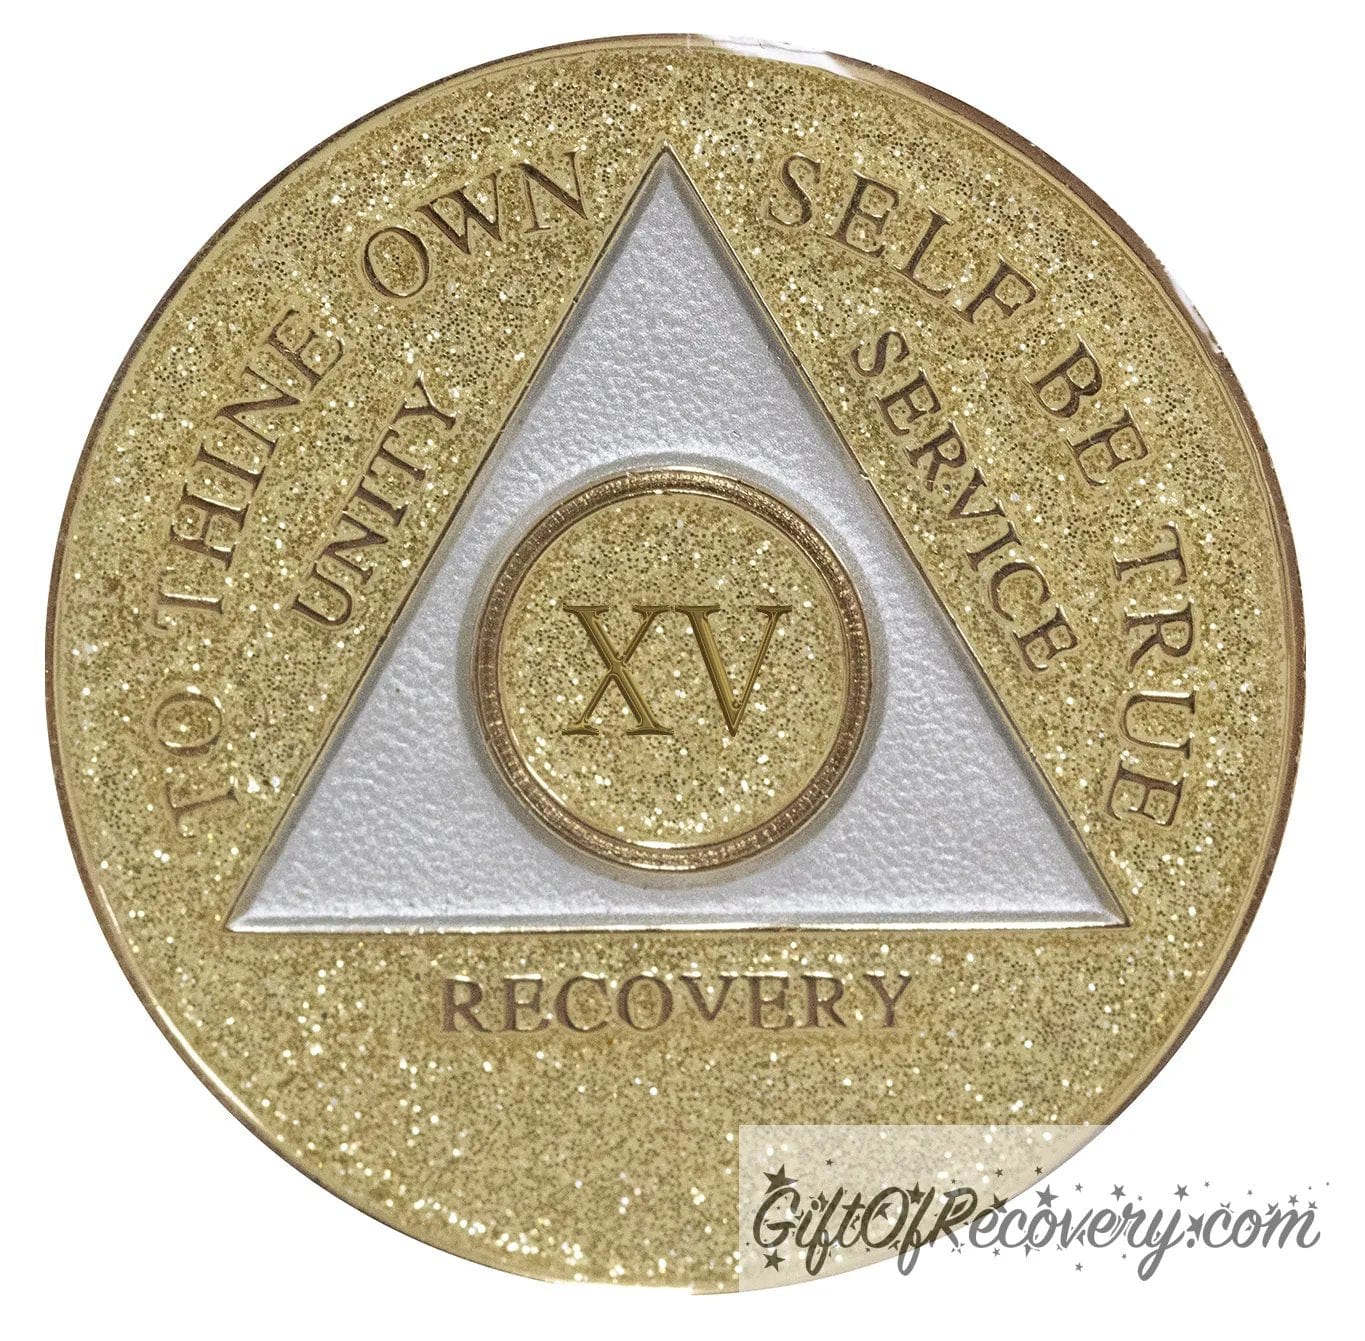 15 year AA medallion Gold glitter, with the triangle pearl white and to thine own self be true, unity, service, recovery, and the roman numeral embossed with 14k gold-plated brass, the recovery medallion is sealed with resin for a shiny finish that will last and is scratch proof.